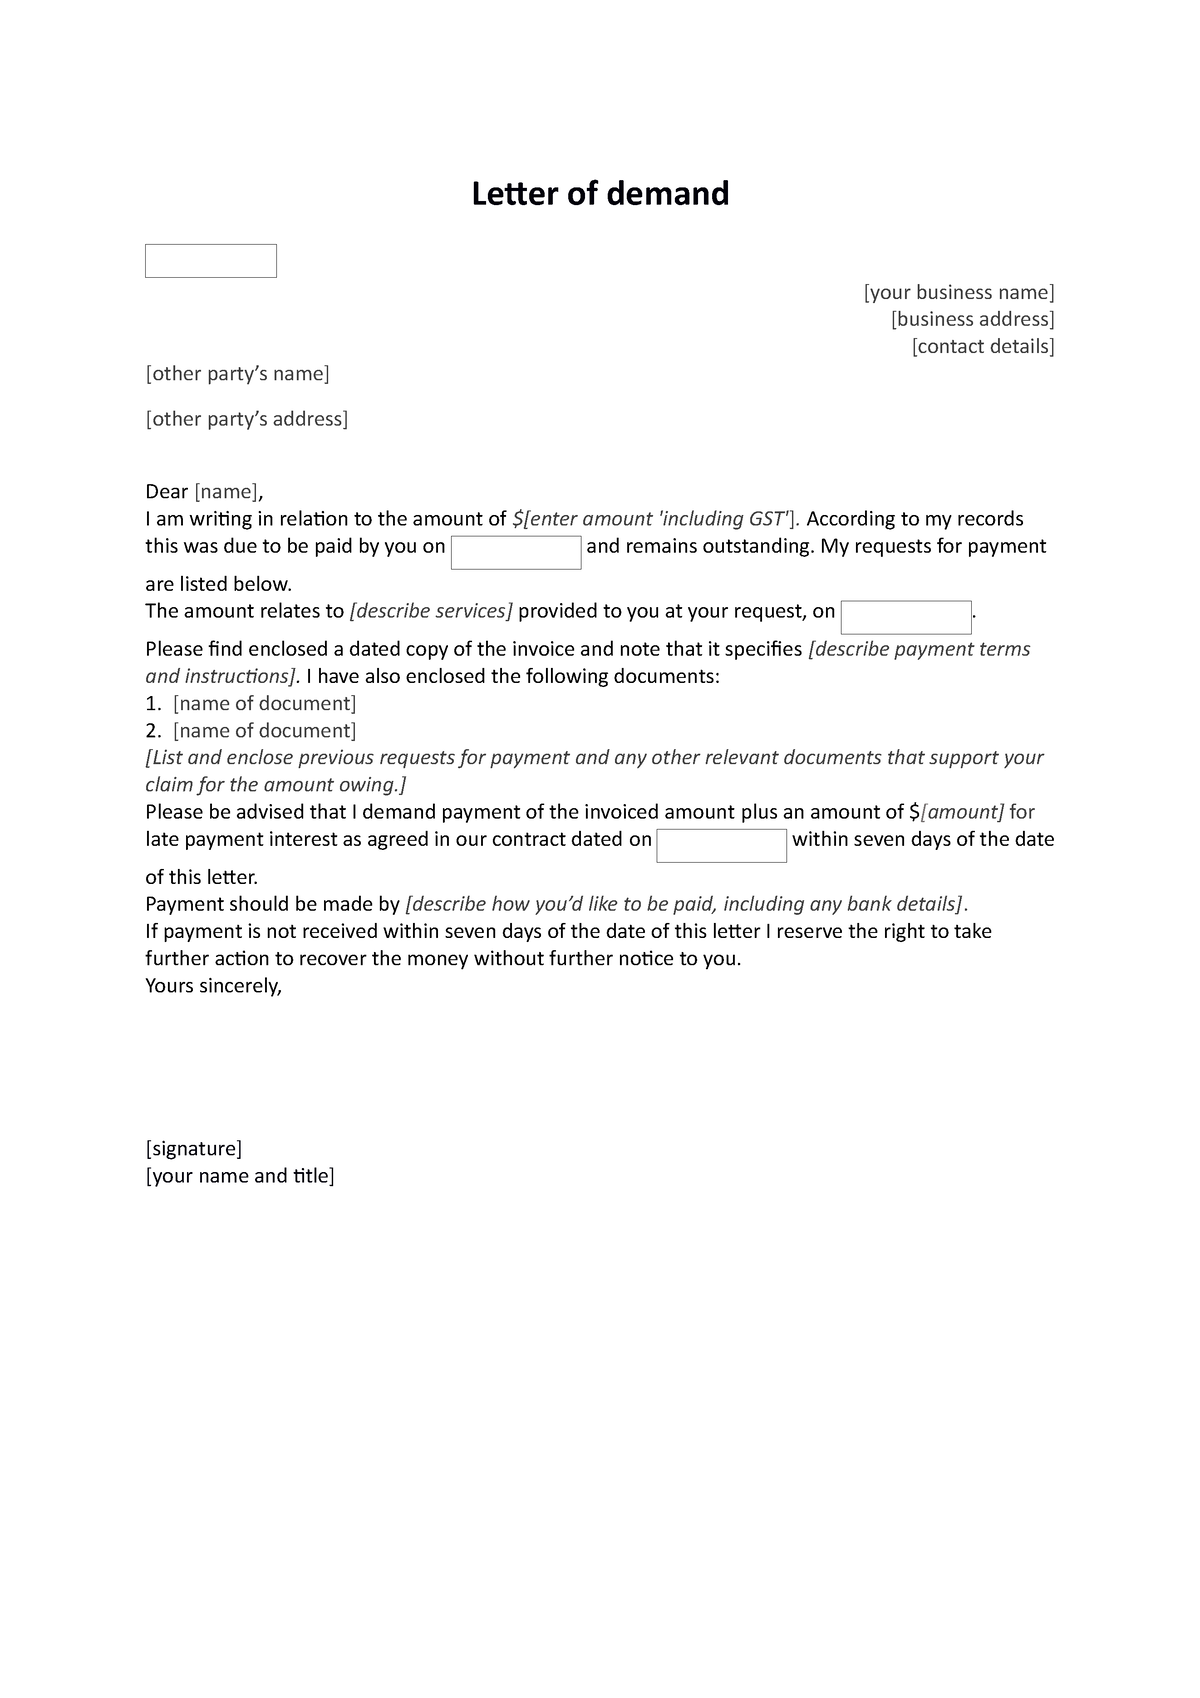 Letter of demand template - Letter of demand [your business name ...